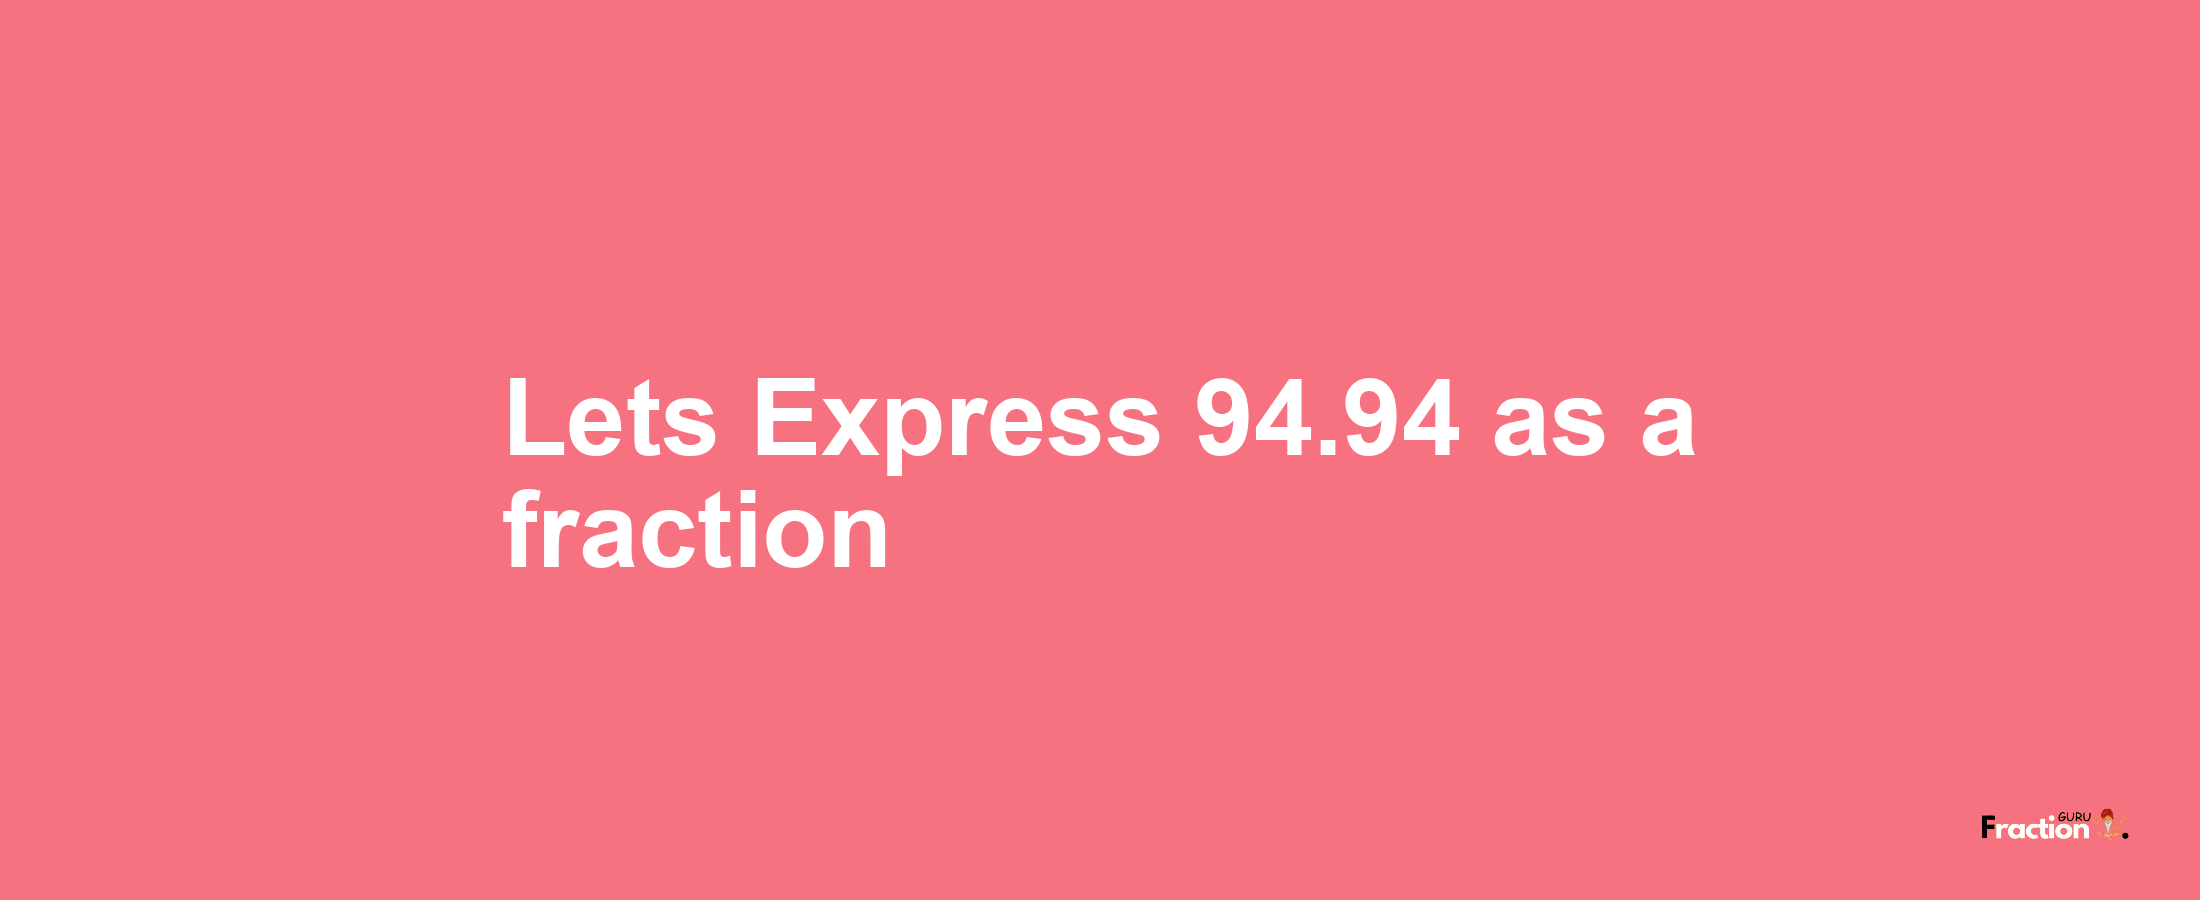 Lets Express 94.94 as afraction